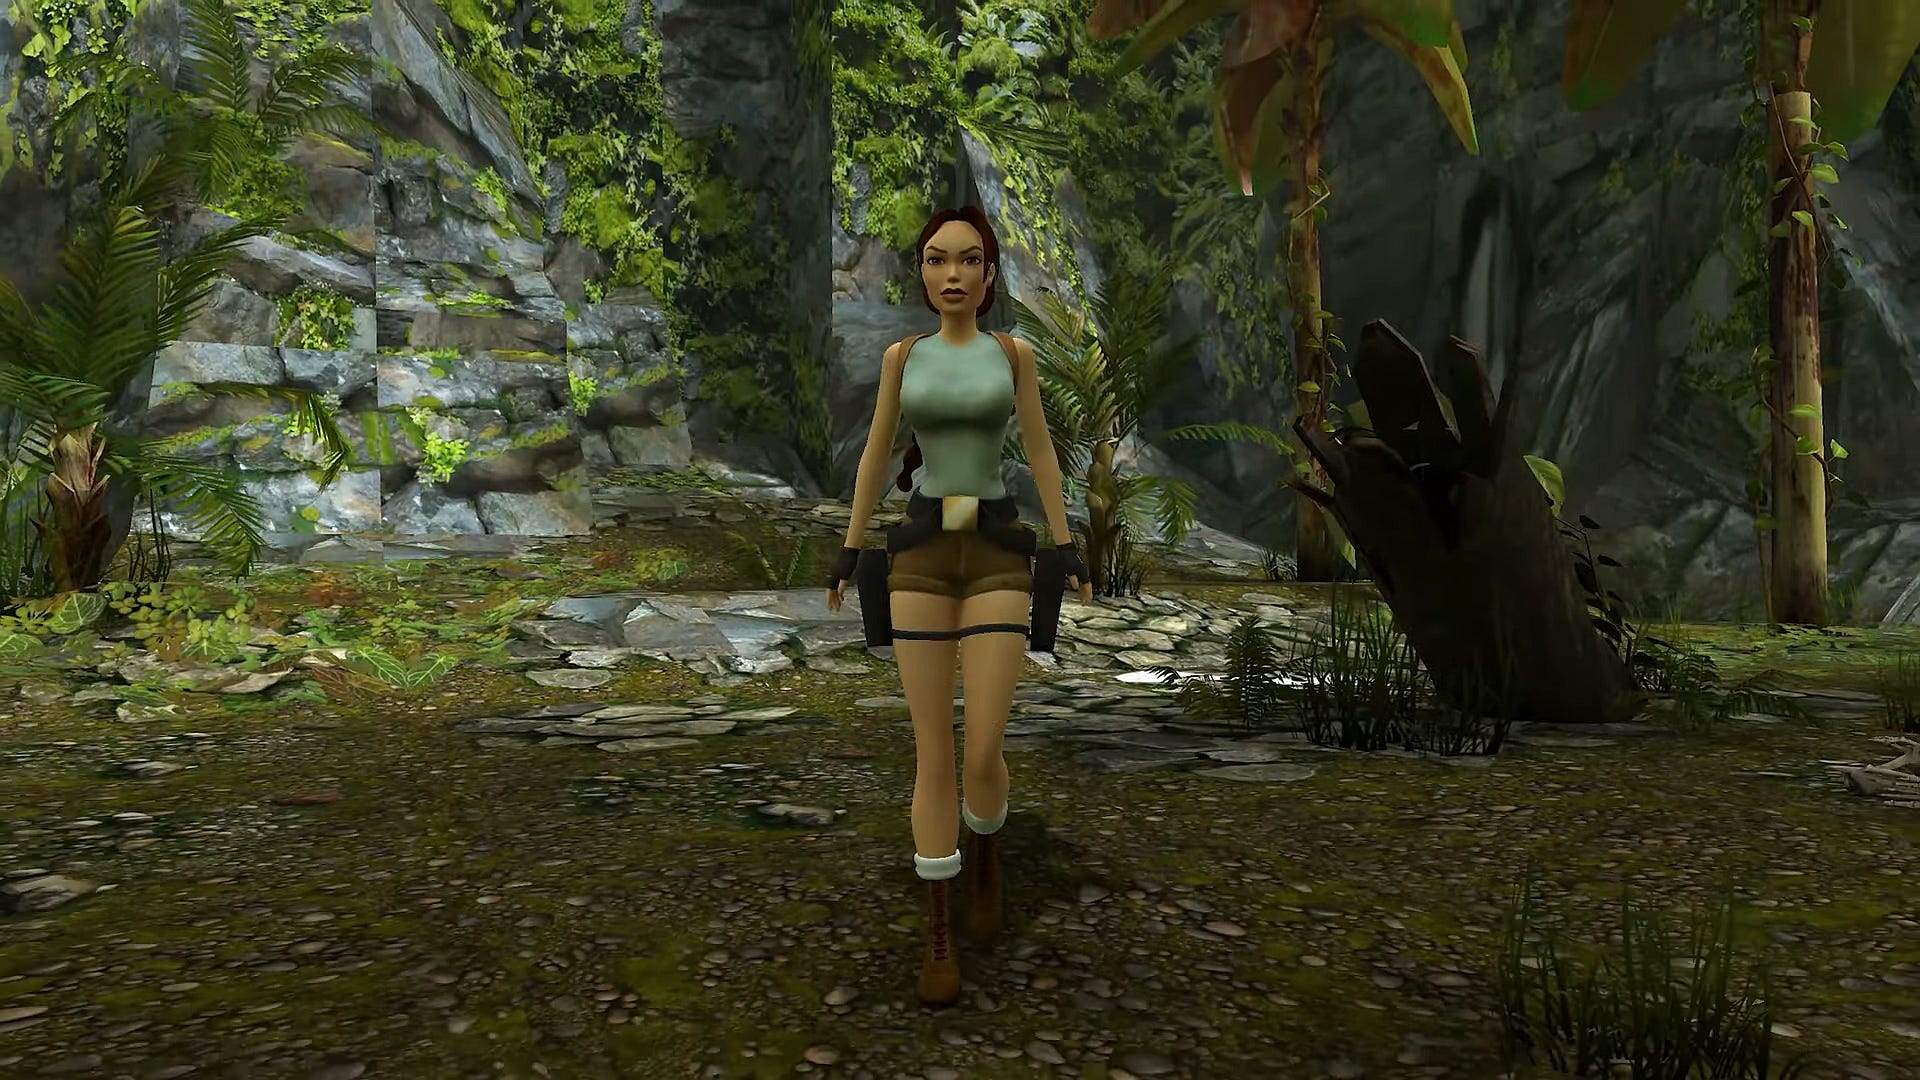 The original Tomb Raider Trilogy gets a remastered release in 2024